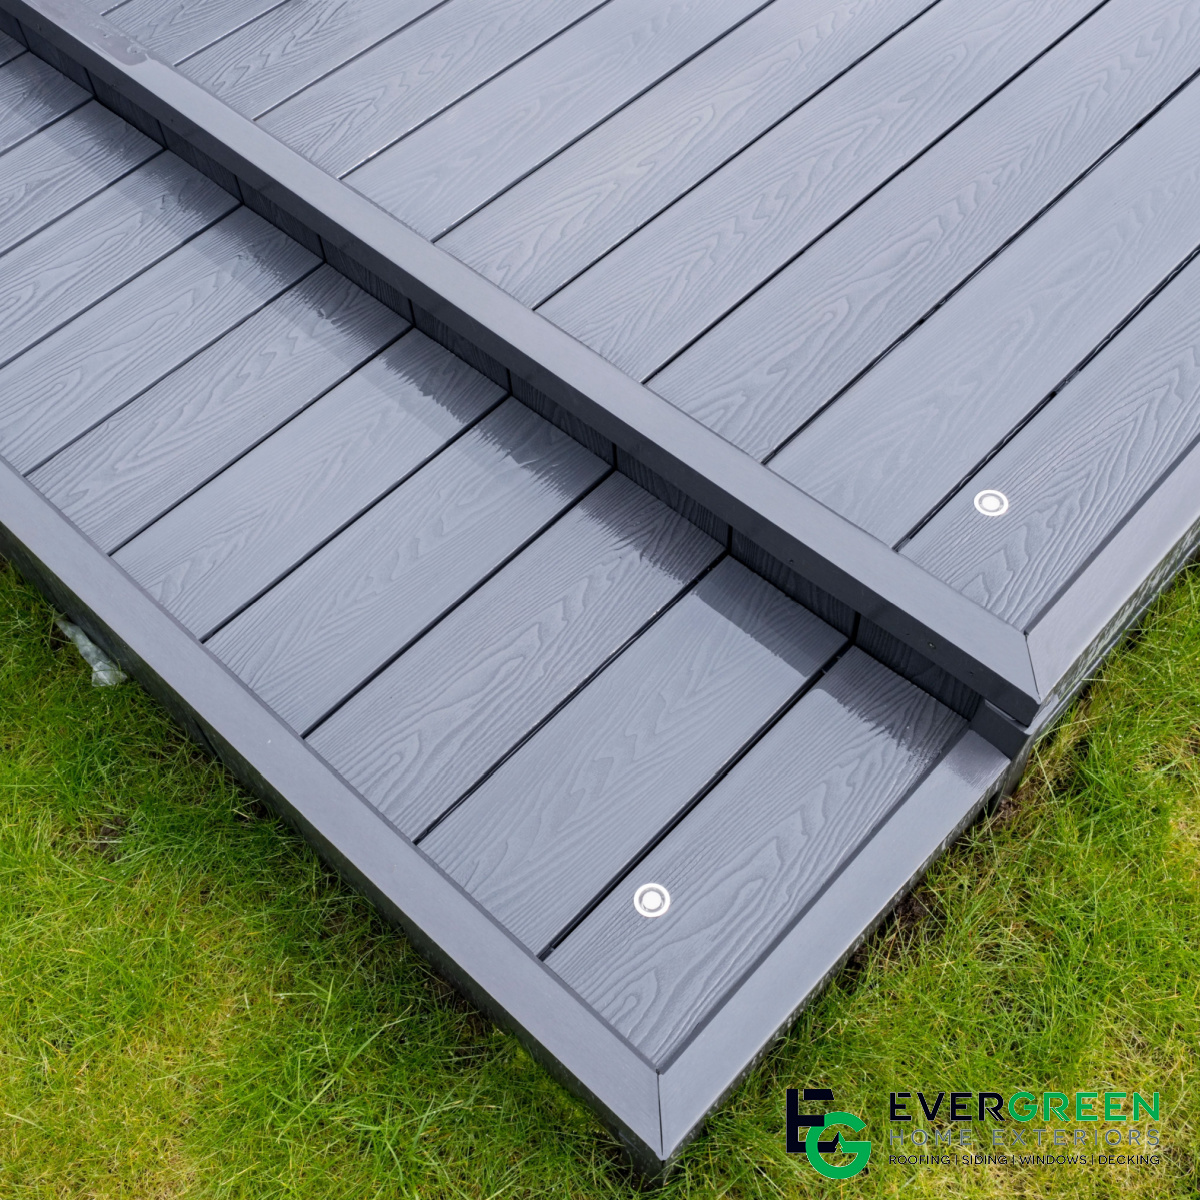 Transform Your Outdoor Space with Evergreen Home Exteriors' Premier Deck Installation Services in Tacoma